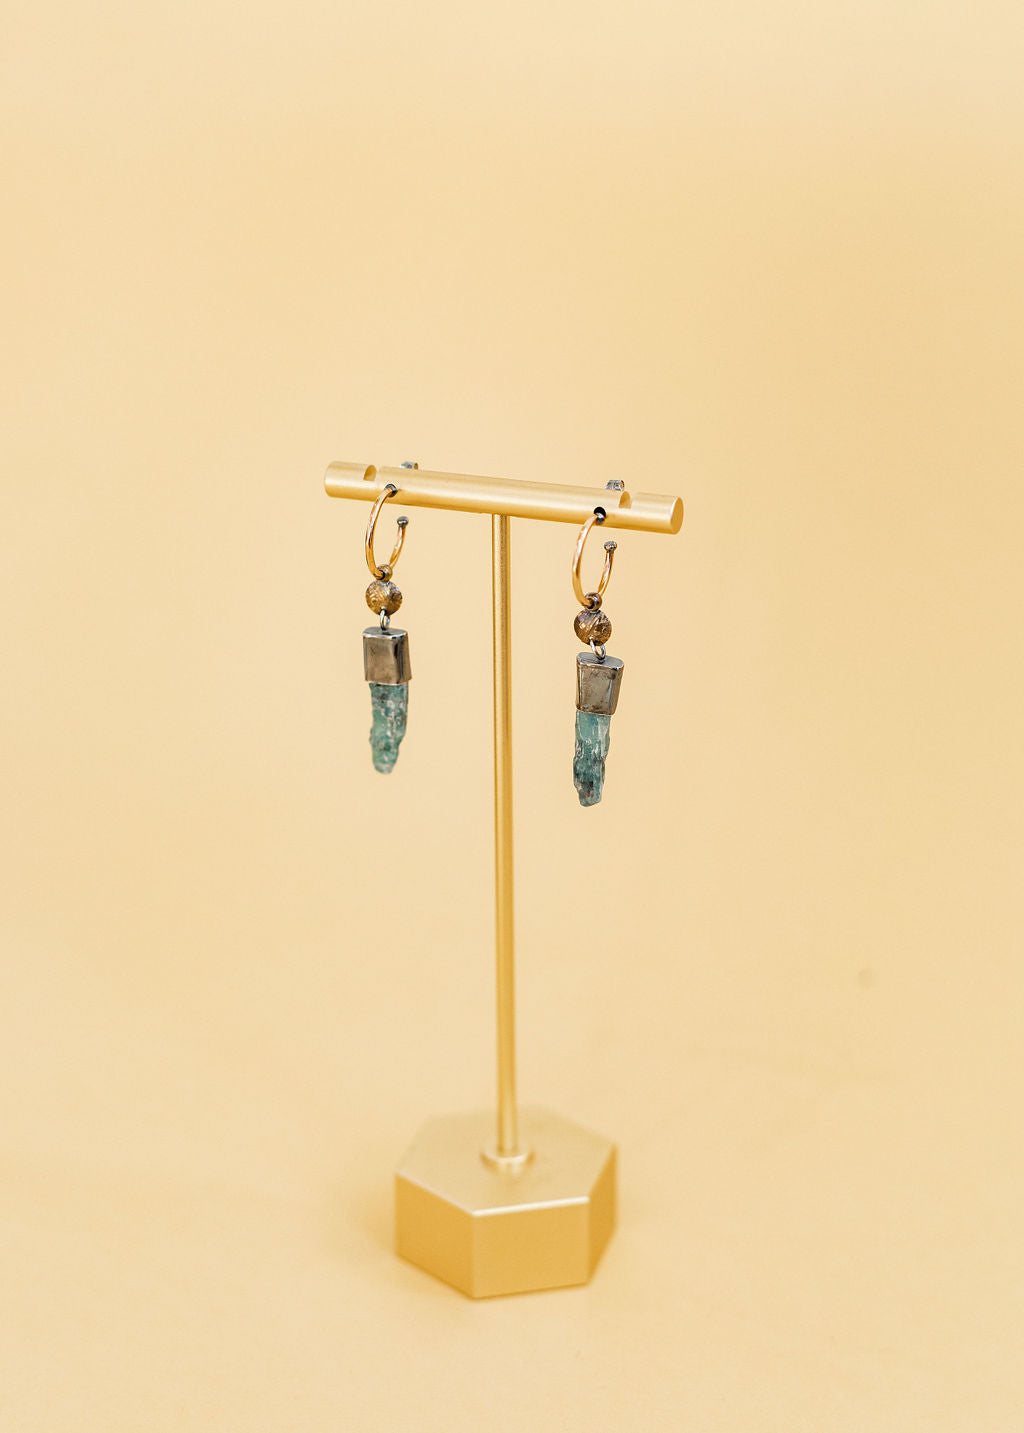 Two Claire Sommers Buck earrings on an earring stand